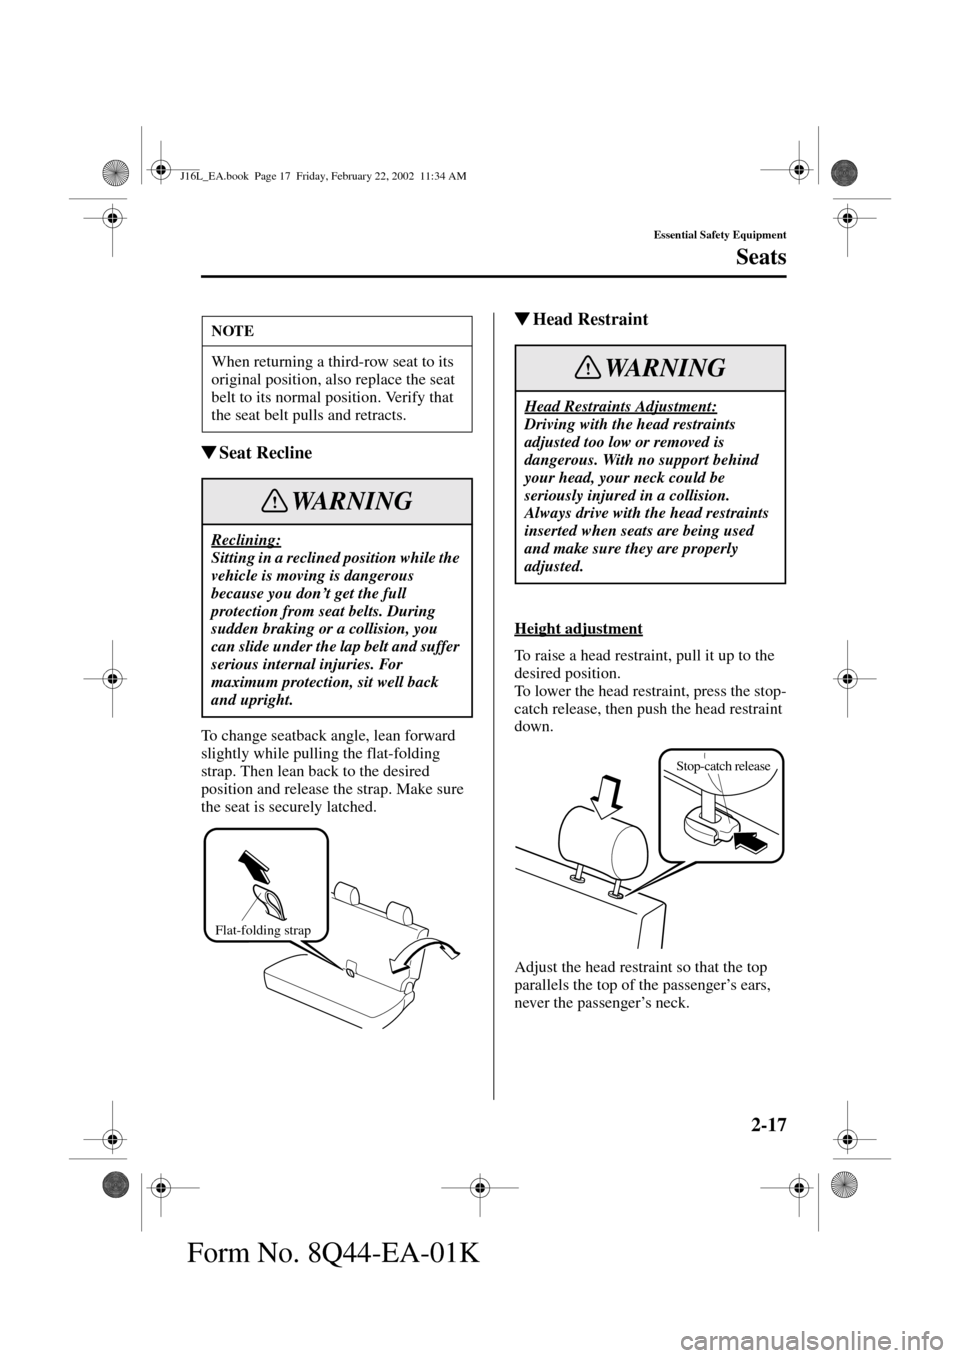 MAZDA MODEL MPV 2002  Owners Manual (in English) 2-17
Essential Safety Equipment
Seats
Form No. 8Q44-EA-01K
Seat Recline
To change seatback angle, lean forward 
slightly while pulling the flat-folding 
strap. Then lean back to the desired 
position